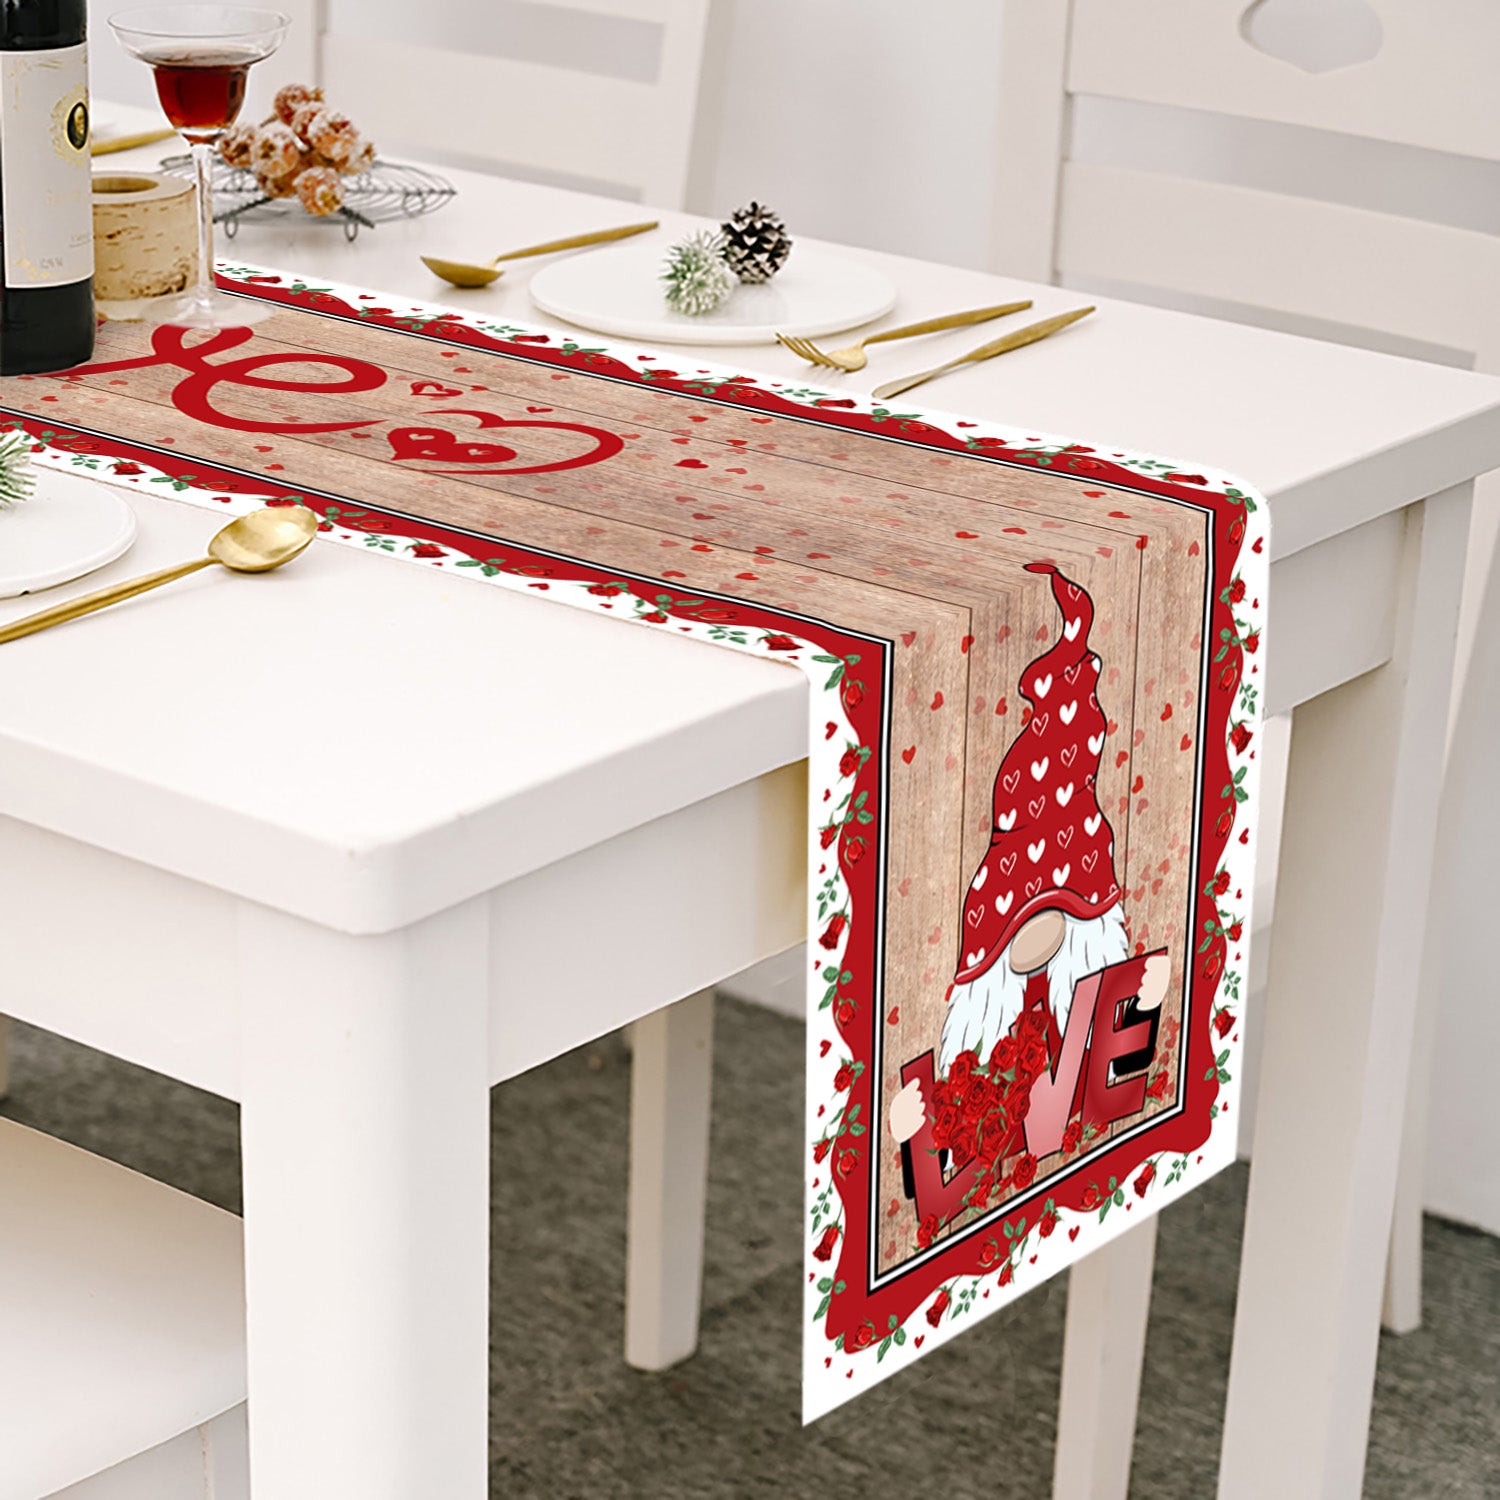 Love & Rose - Gnome Themed Table Runner For Valentine's Day